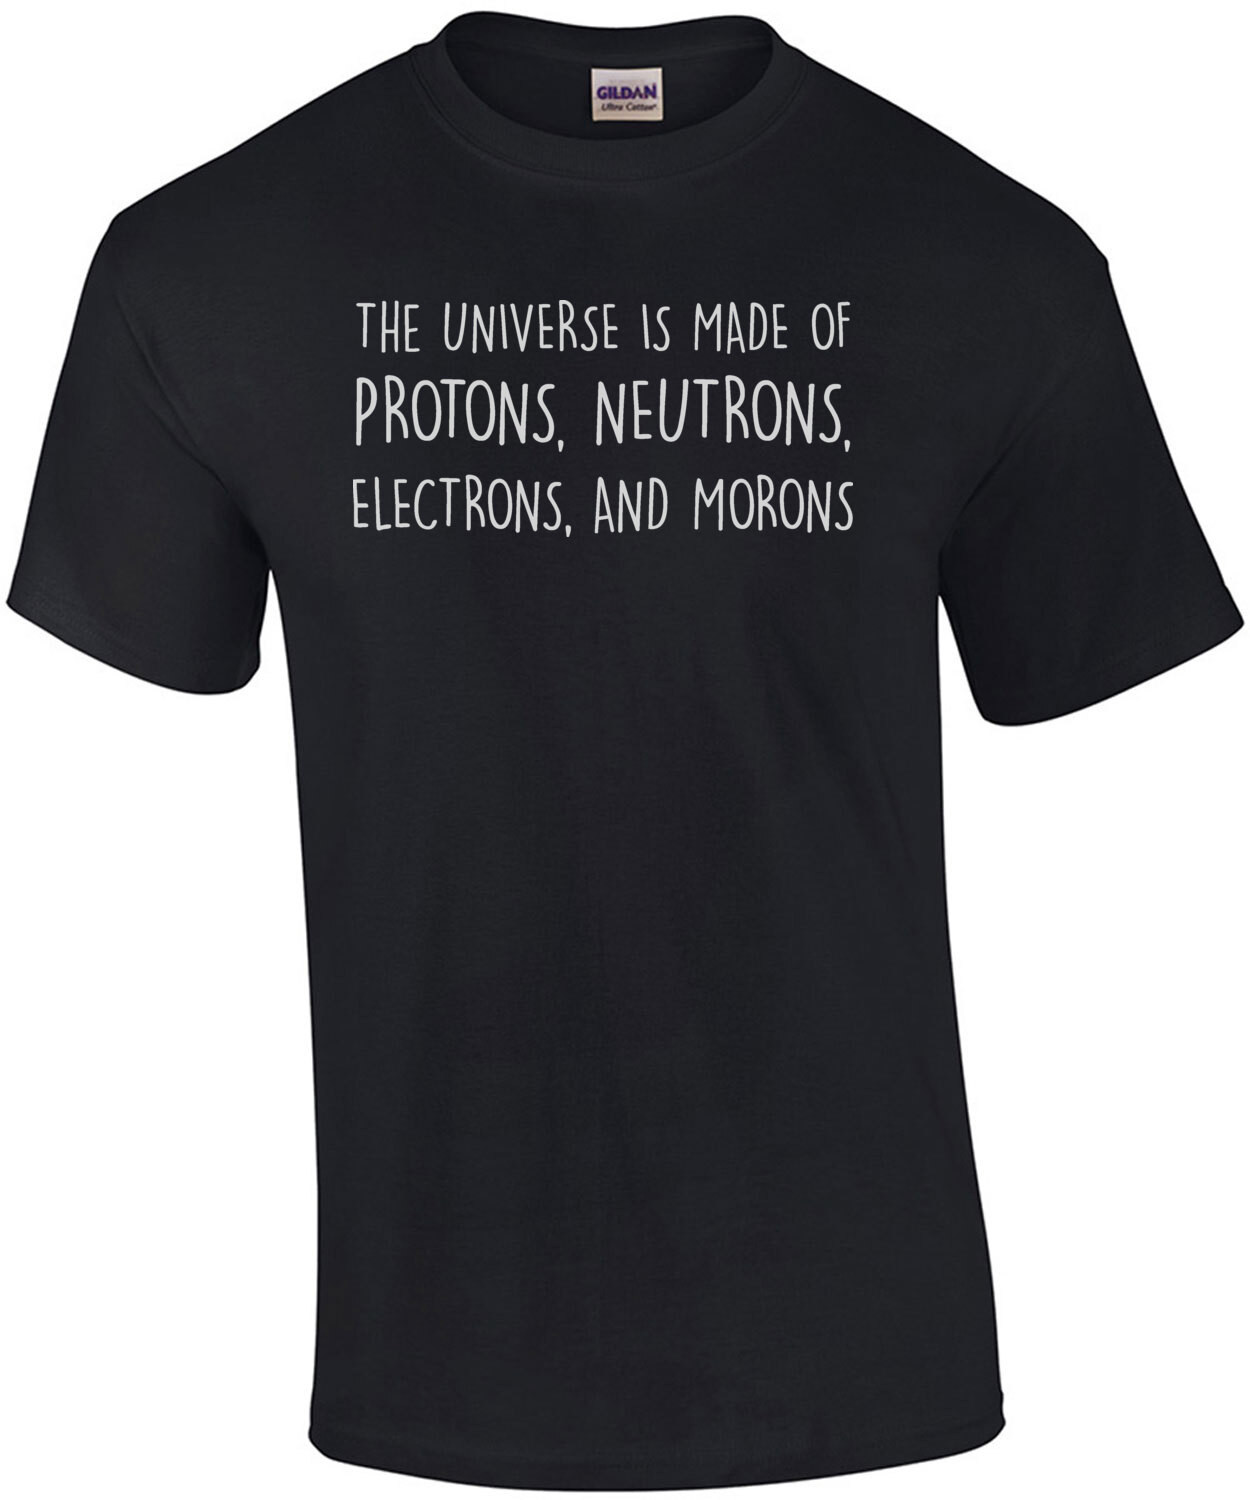 The universe is made of protons, neutrons, electrons, and morons - funny science sarcastic t-shirt